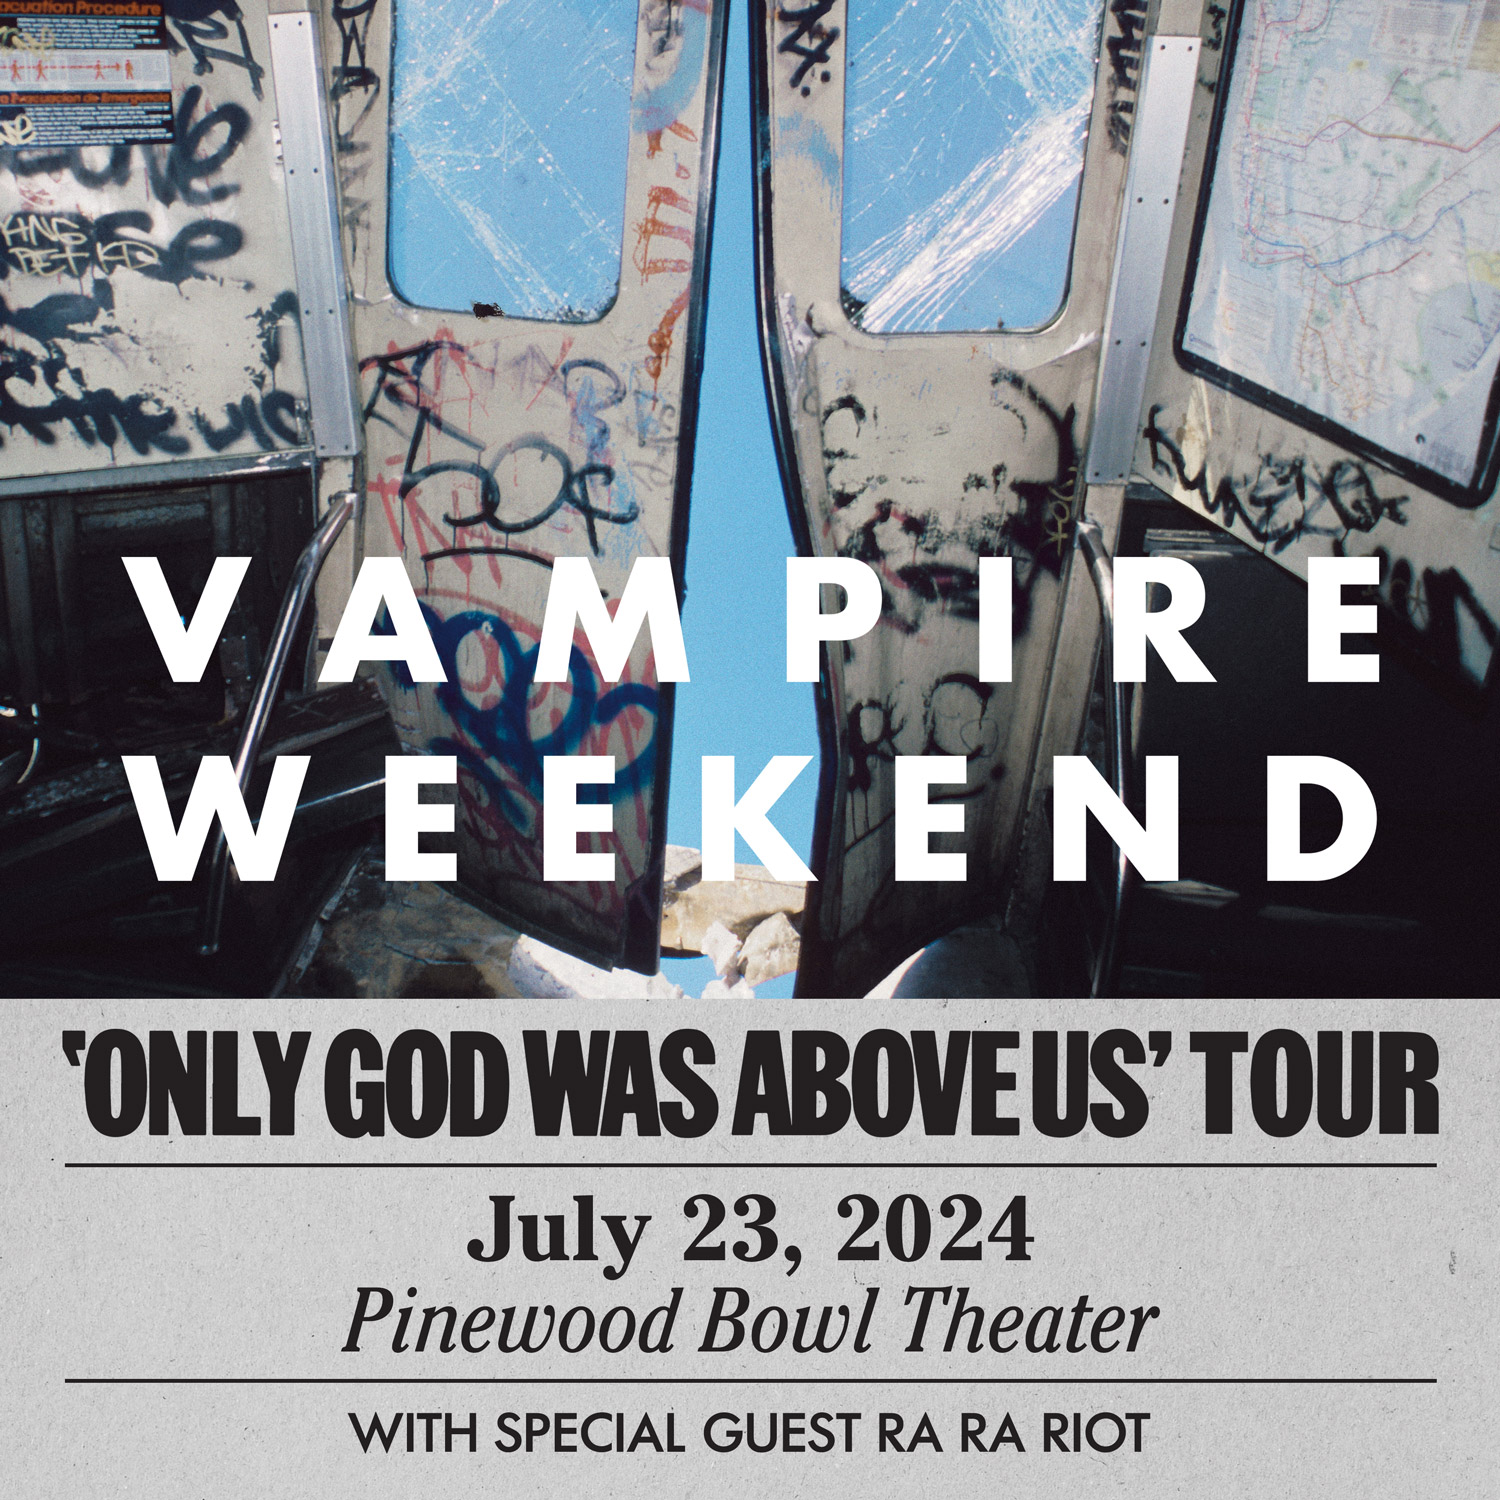 <h1 class="tribe-events-single-event-title">Vampire Weekend</h1>